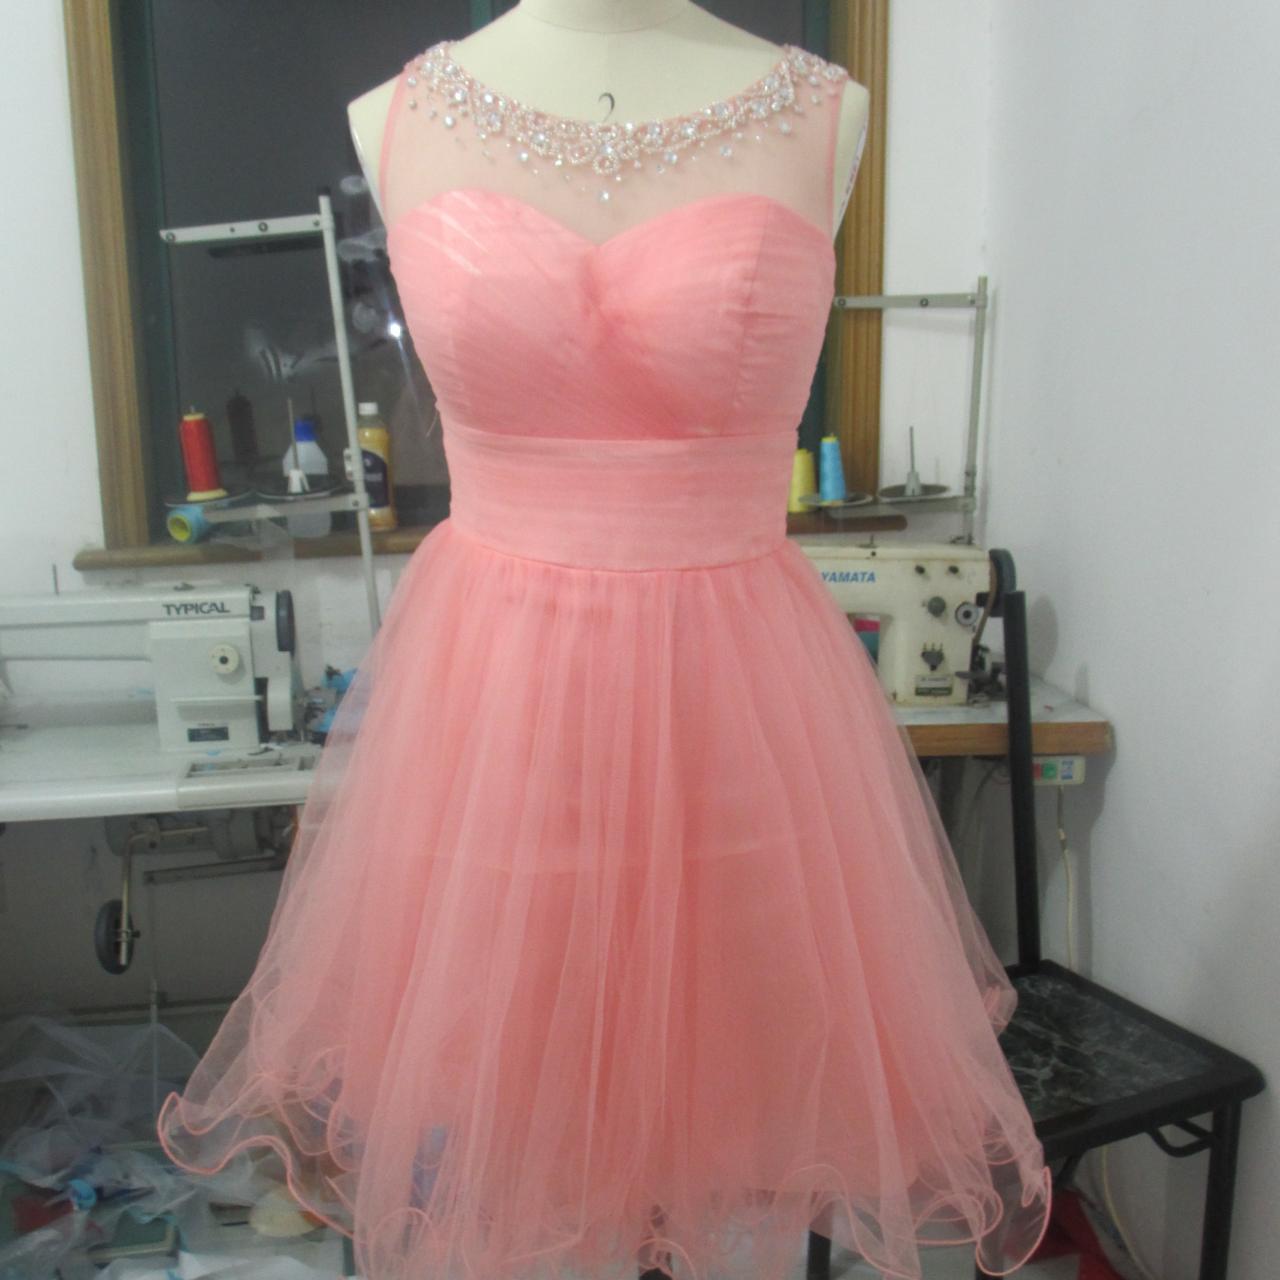 Lovely Short Tulle Homecoming Dresses 2016 Scoop Neck Crystals Beaded Party Dresses Custom Made